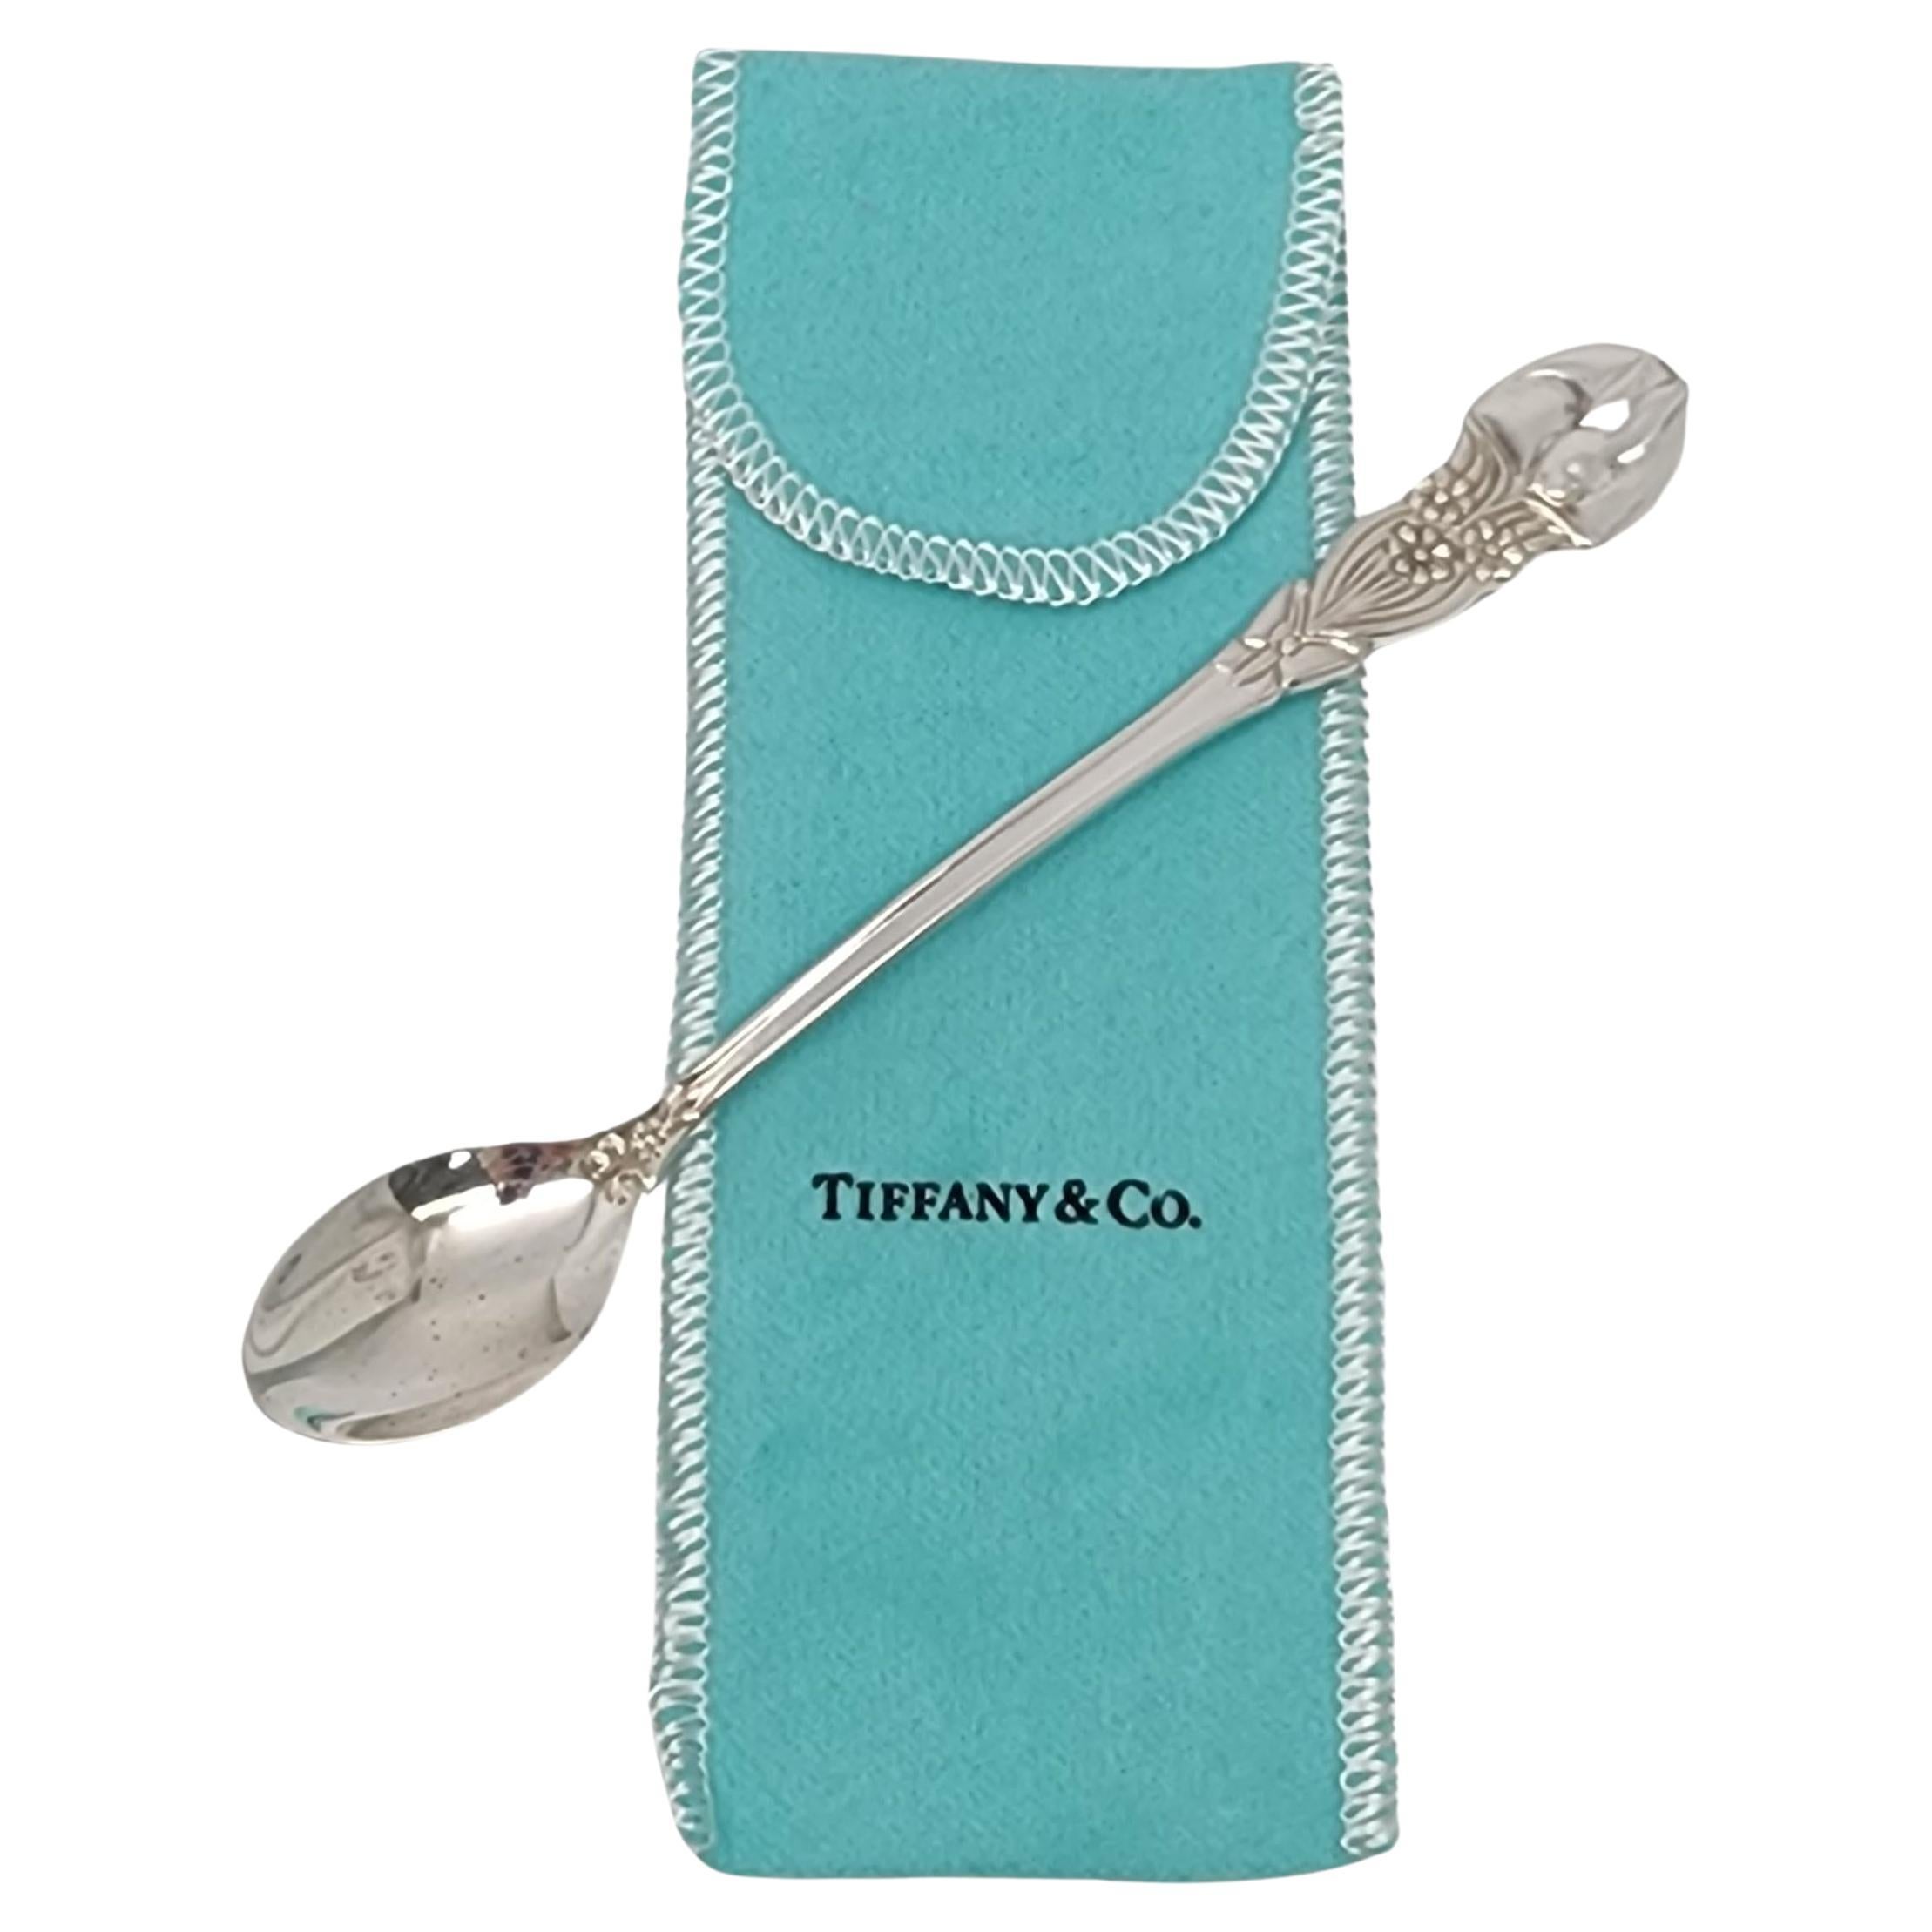 Tiffany & Co Sterling Silver Meadows Bunny Rabbit Baby Spoon with Pouch #16857 For Sale